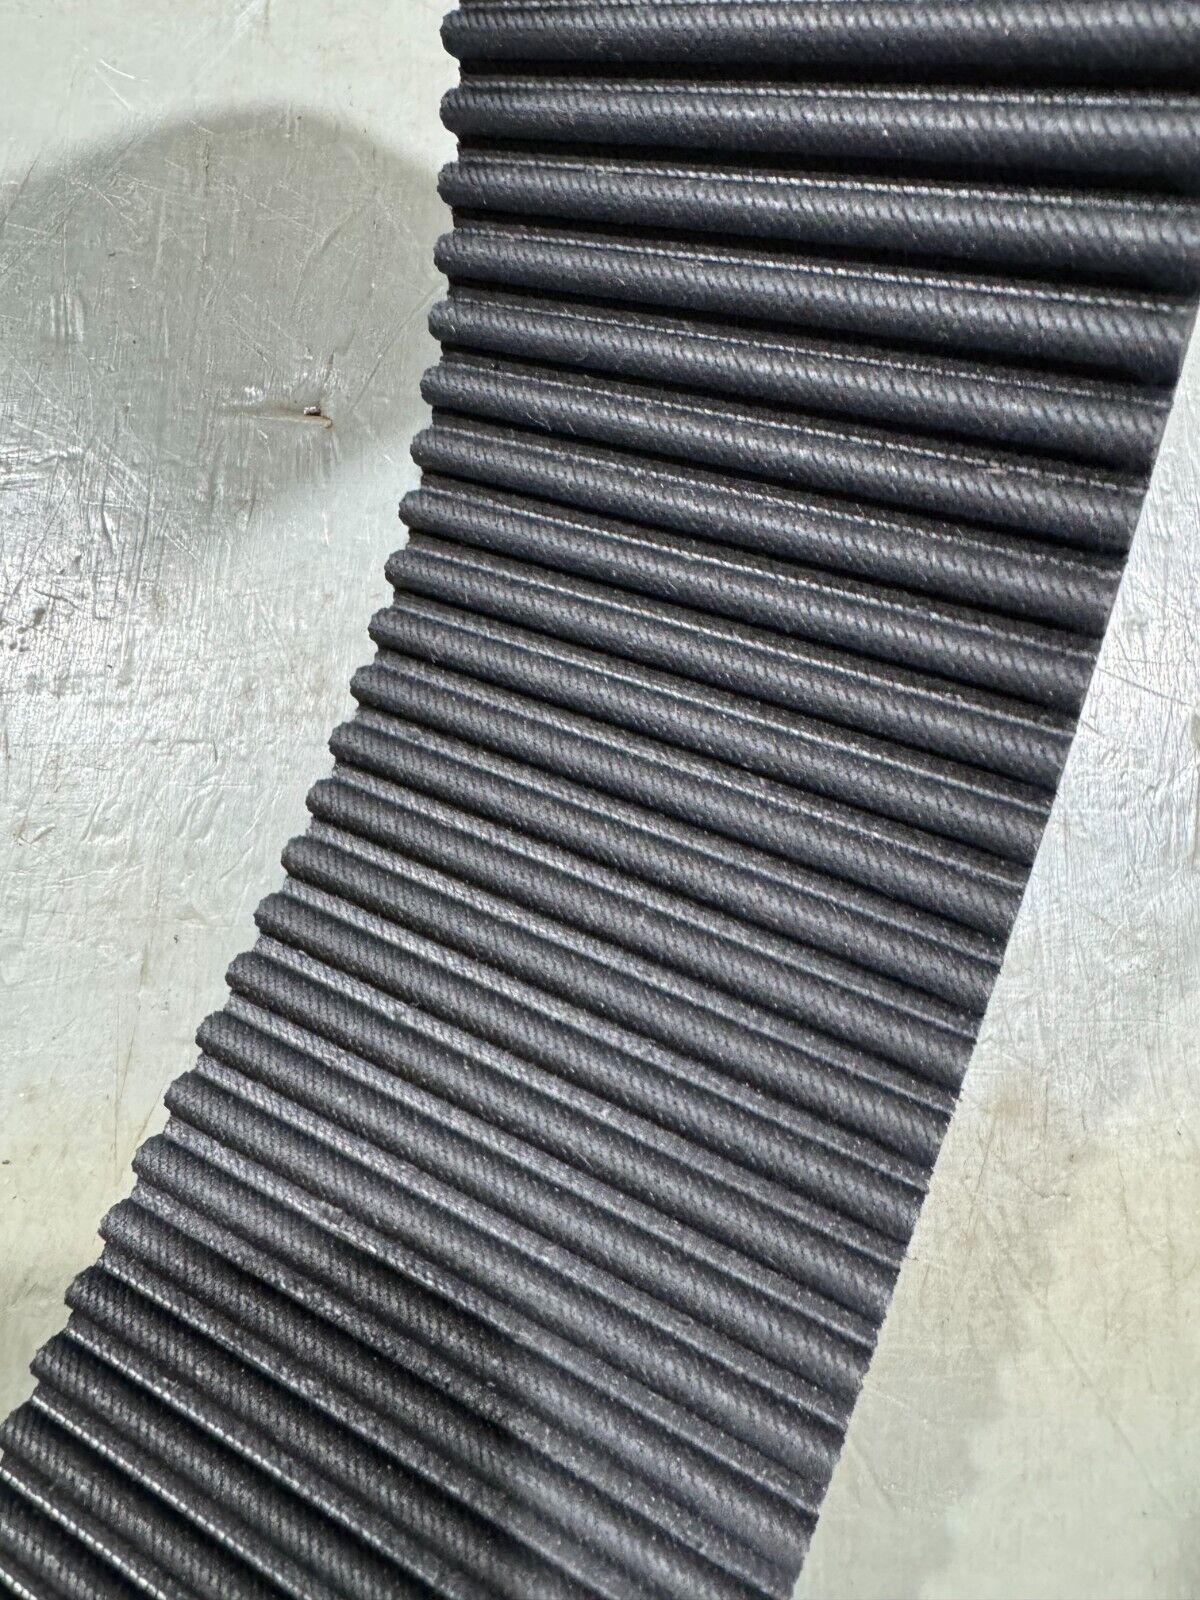 FACTORY NEW GOODYEAR SYNCRONOUS SYNC HTD TIMING BELT 1480-8M-85